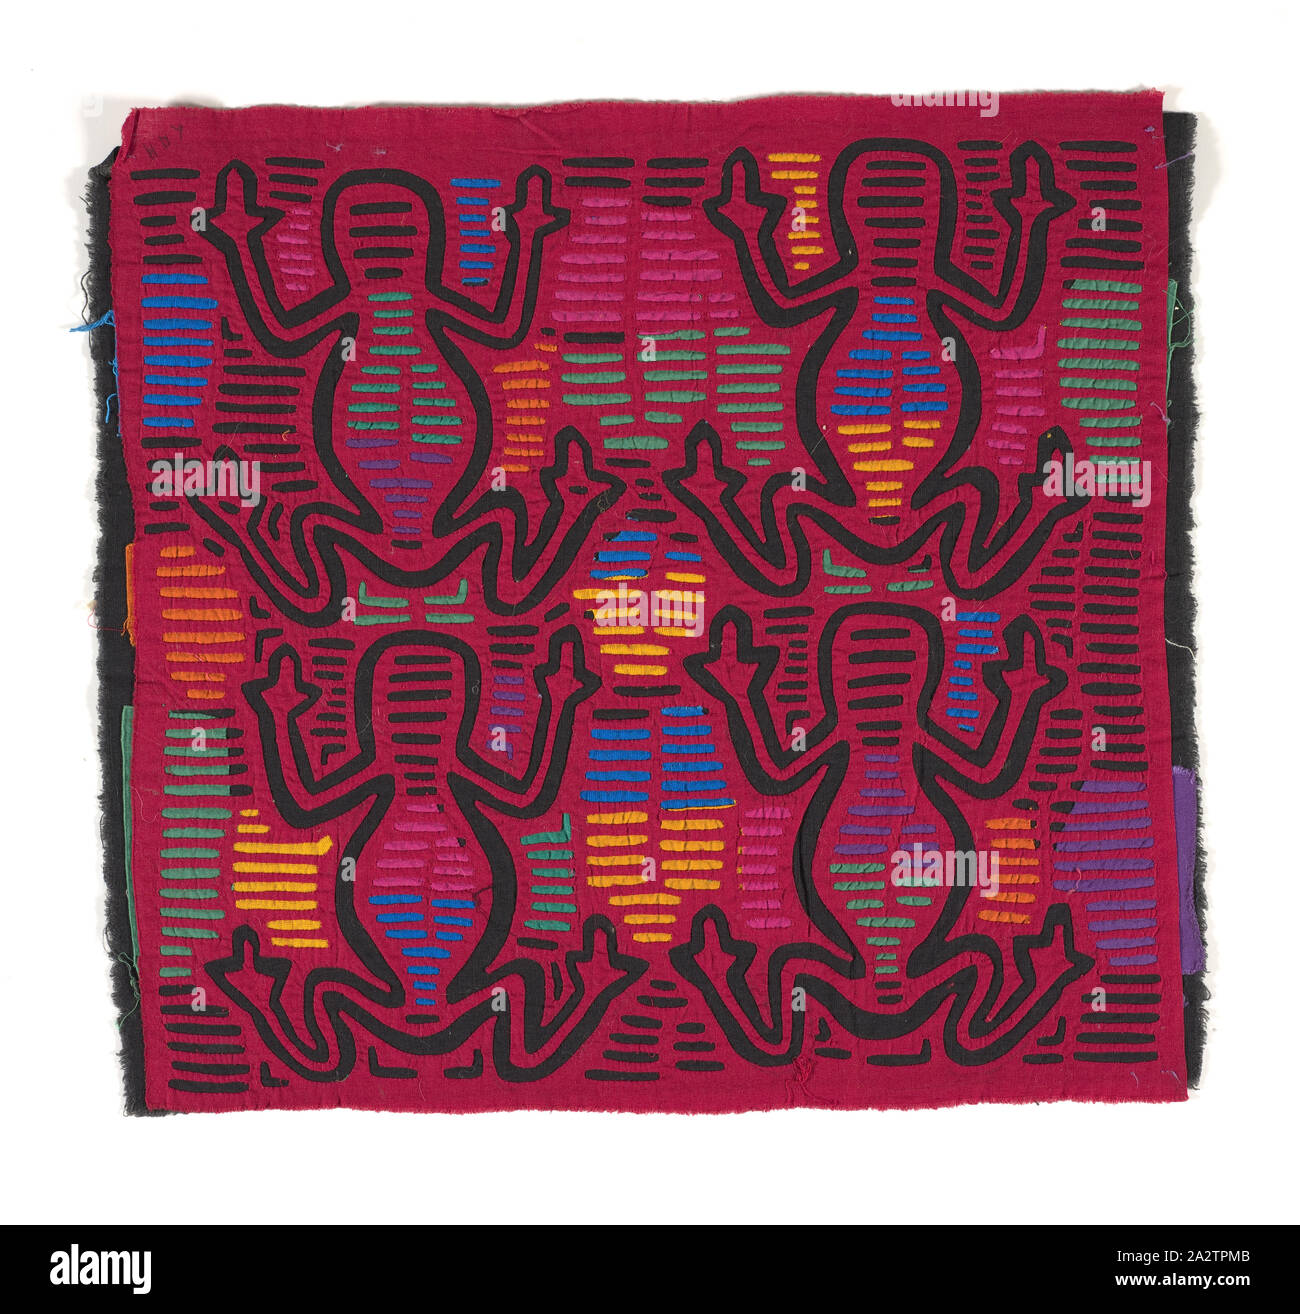 shirt panel (mola), Kuna people, about 1950s, appliqued cotton, 15-3/4 x 17-1/8 in., Textile and Fashion Arts Stock Photo